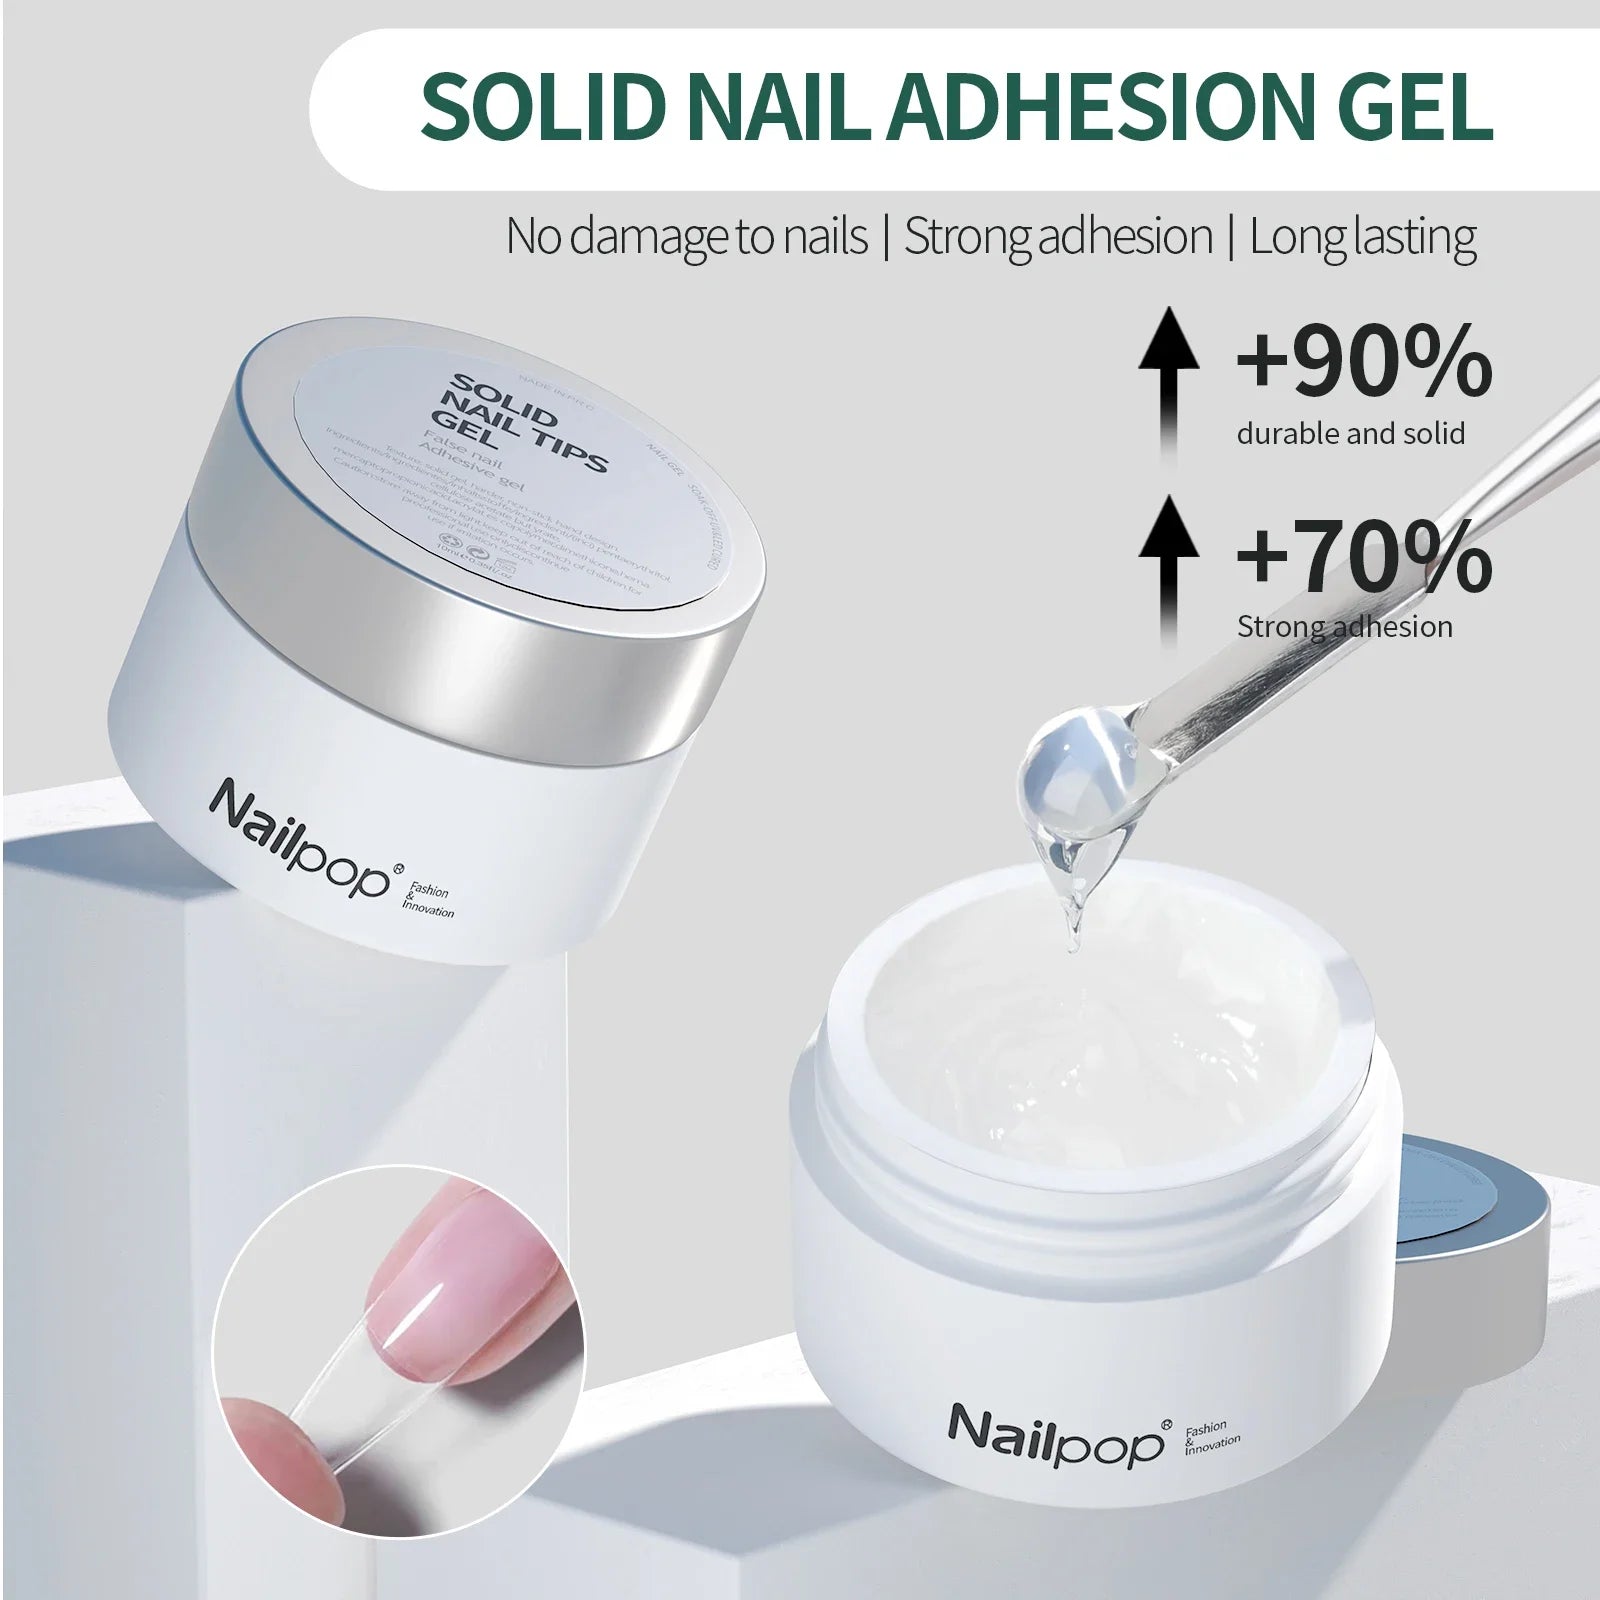 Nailpop Solid Nail Patch Gel Easy Stick Gummy Adhesive Bond UV Glue For American Pose Capsule Tips Strong Adehesion 10ml  beautylum.com   